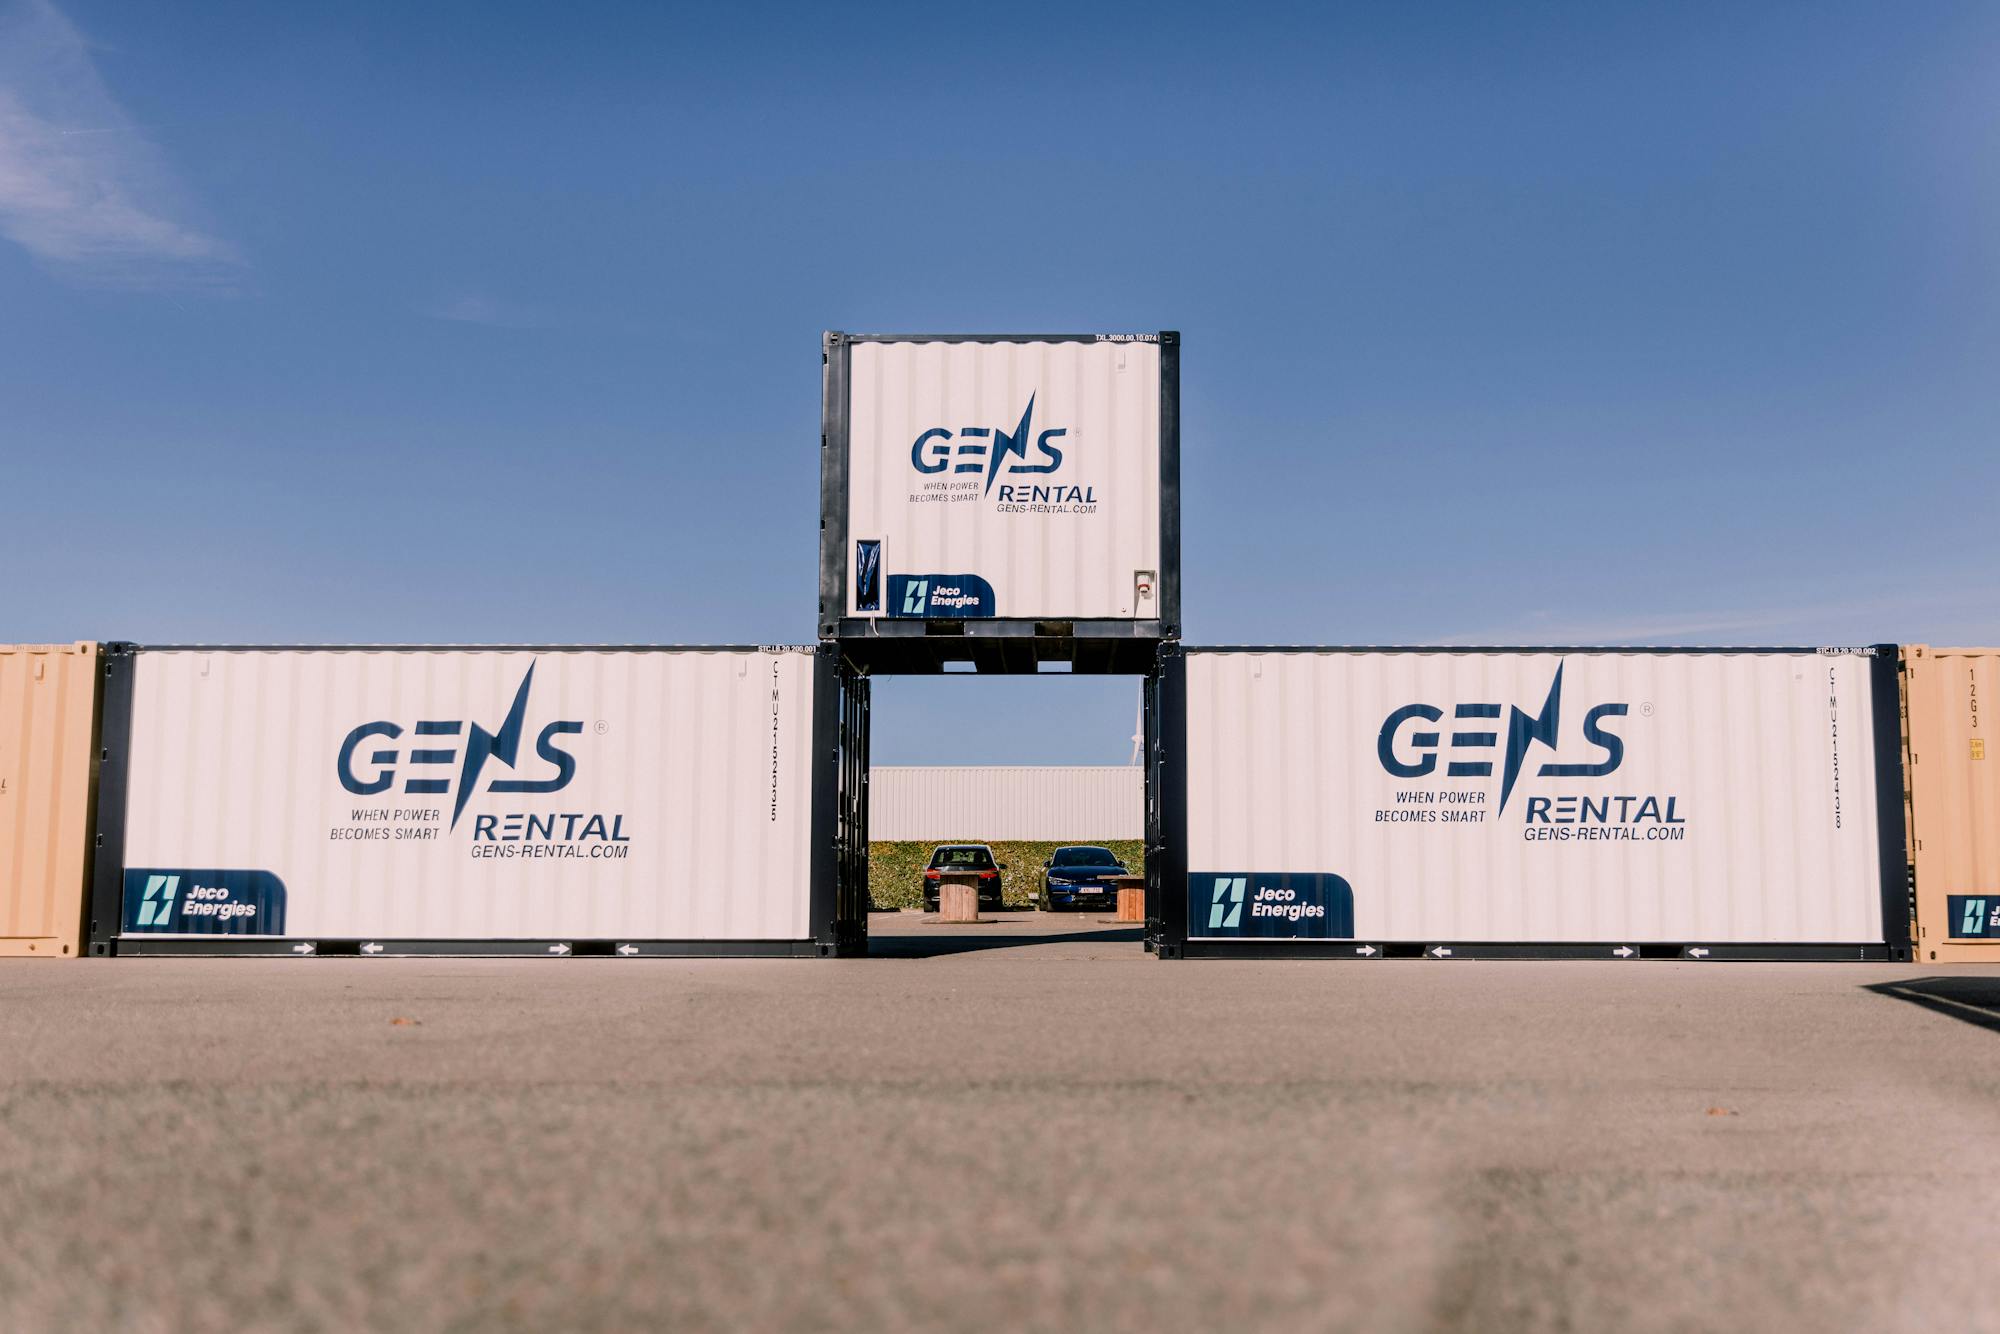 Gens Rental containers